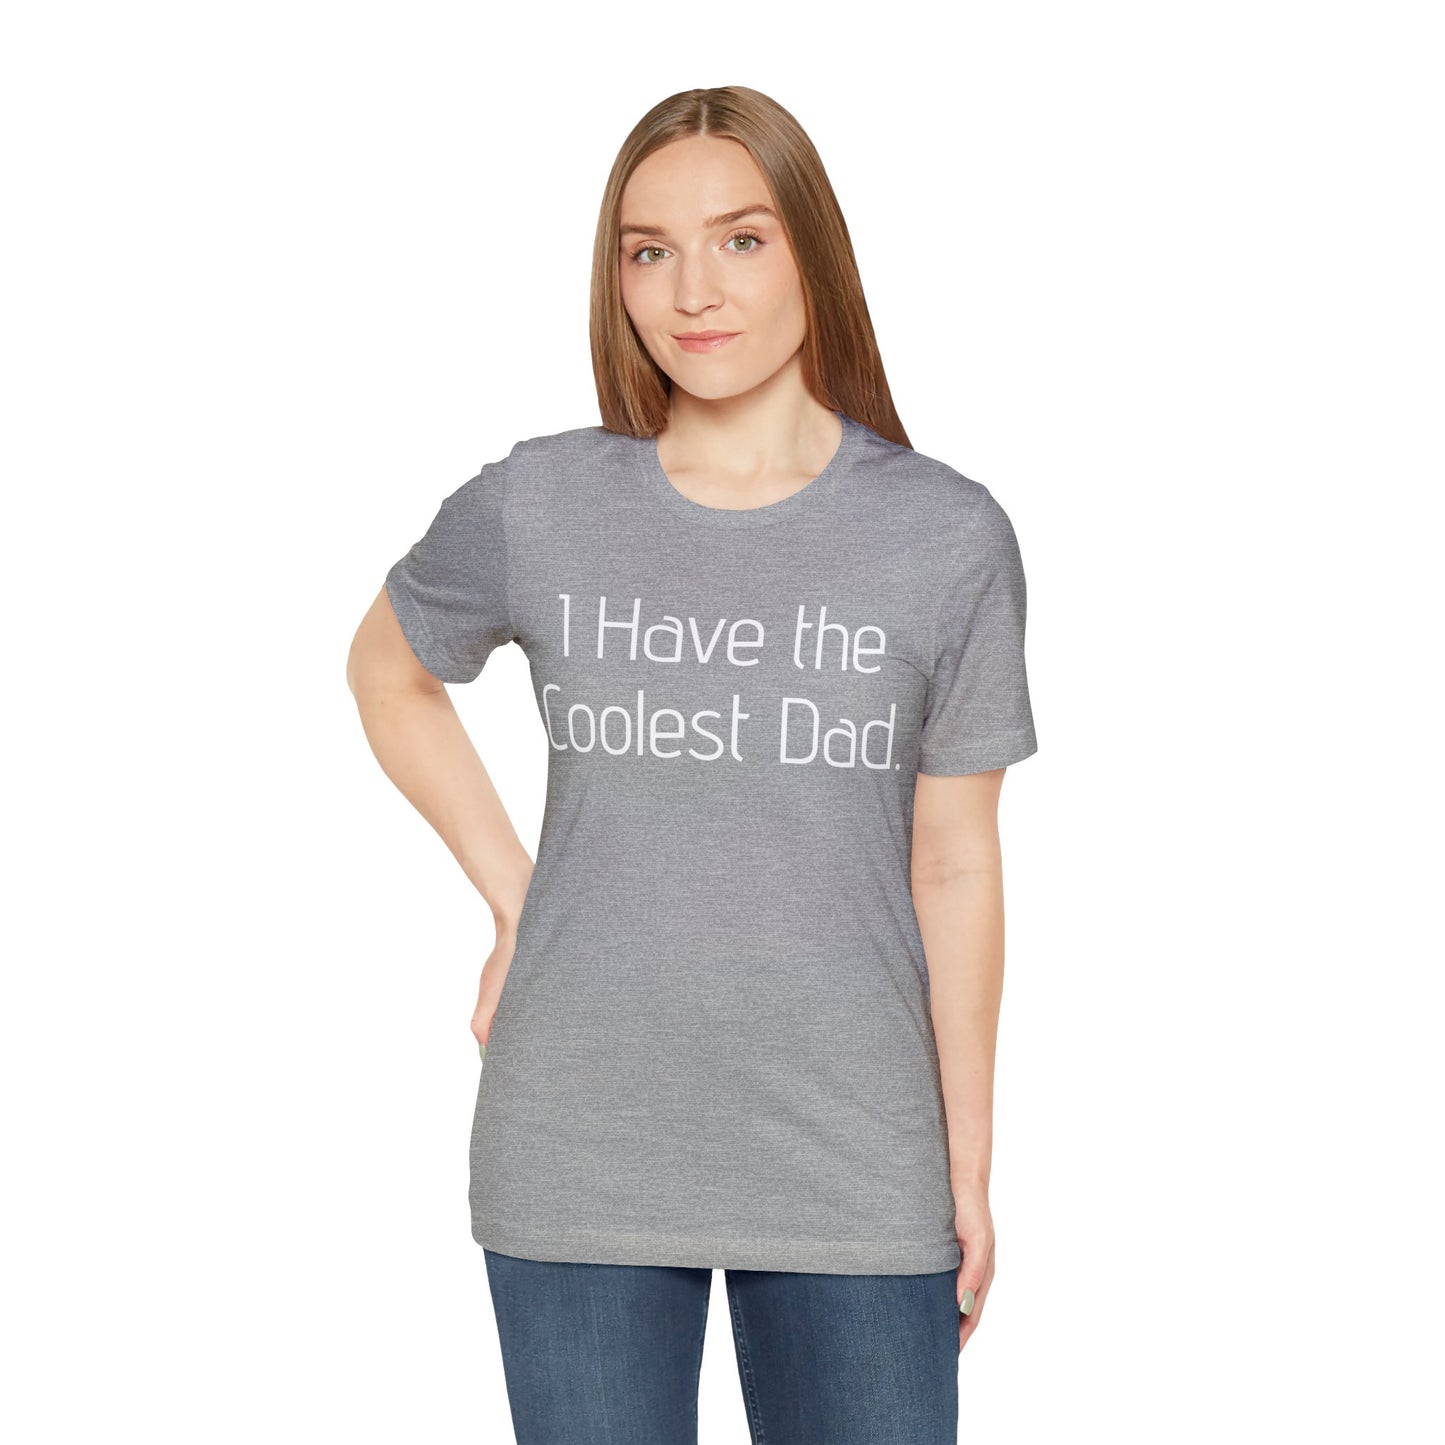 For Son | Daughter Gift Idea From Dad | T-Shirt For Son or Daugher Athletic Heather T-Shirt Petrova Designs